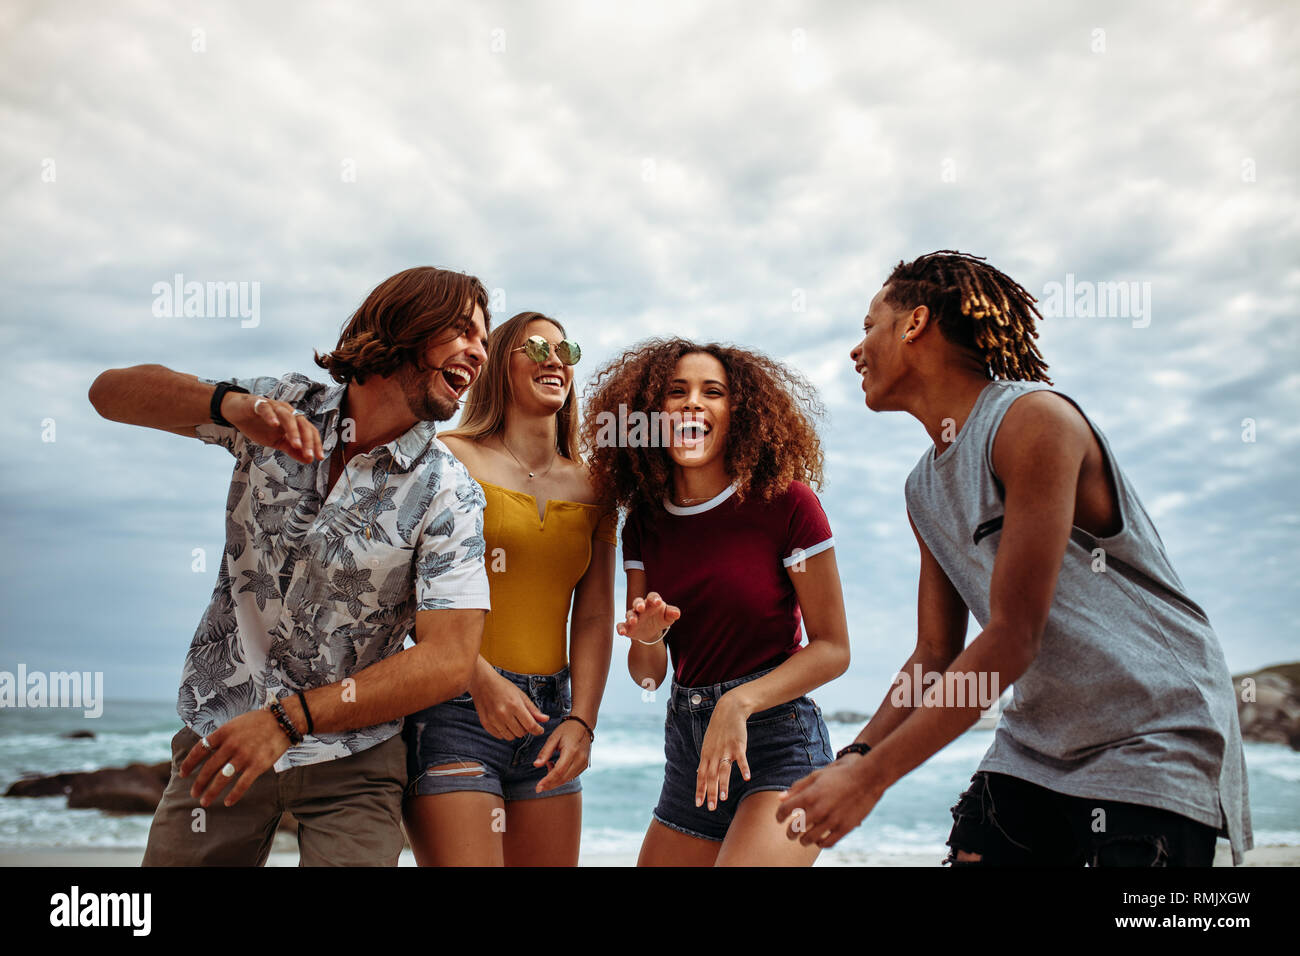 Smiling group of friends enjoying on the beach. Multi-ethnic men and women having fun outdoors along the beach. Stock Photo